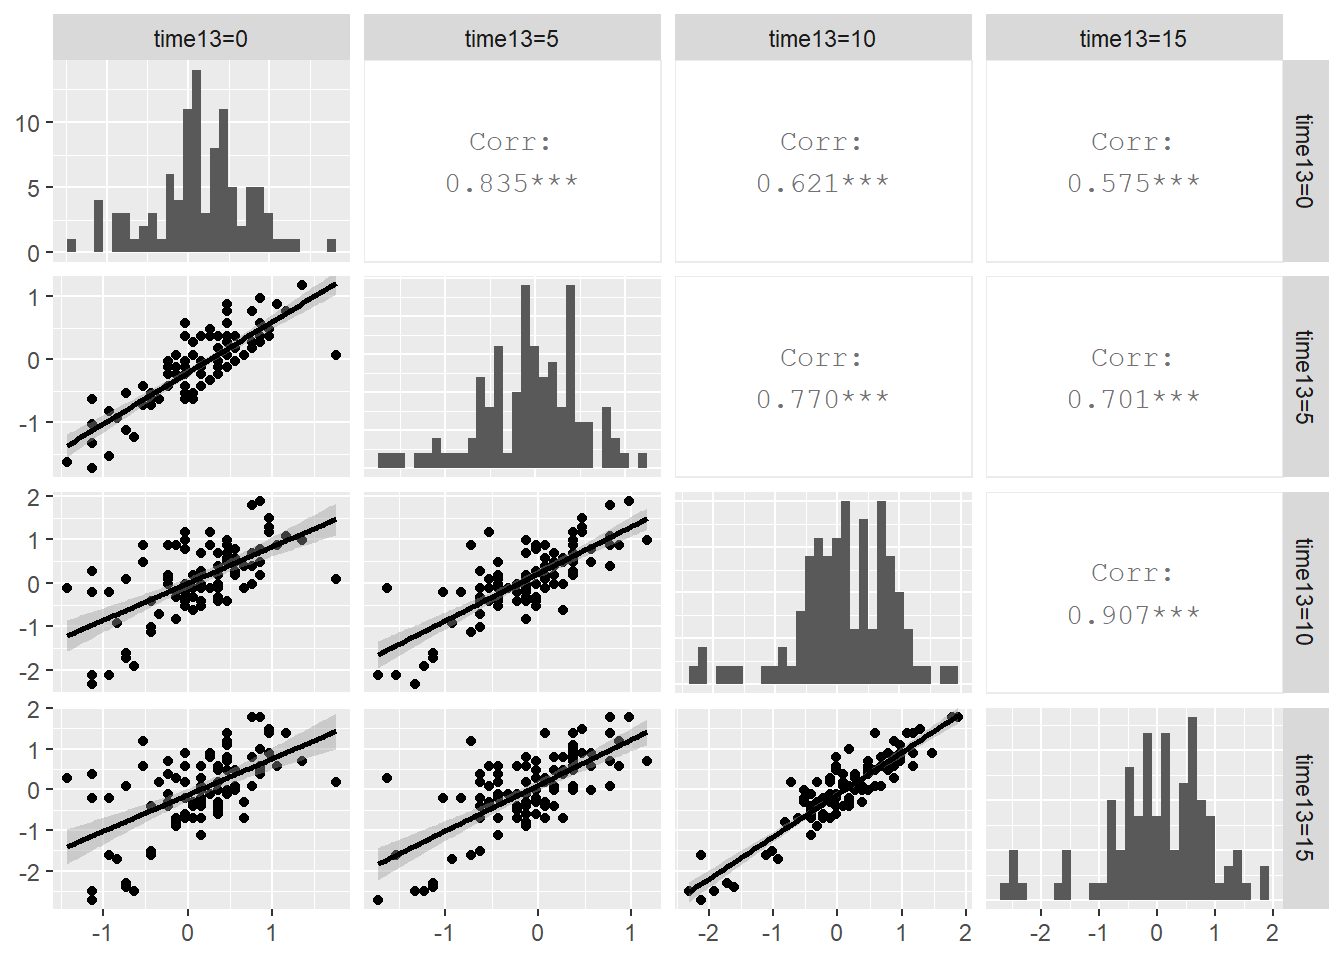 Correlation structure within plant.  The upper right contains correlation coefficients between residuals at pairs of time points, the lower left contains scatterplots of the residuals at time point pairs, and the diagonal contains histograms of residuals at each of the four time points.